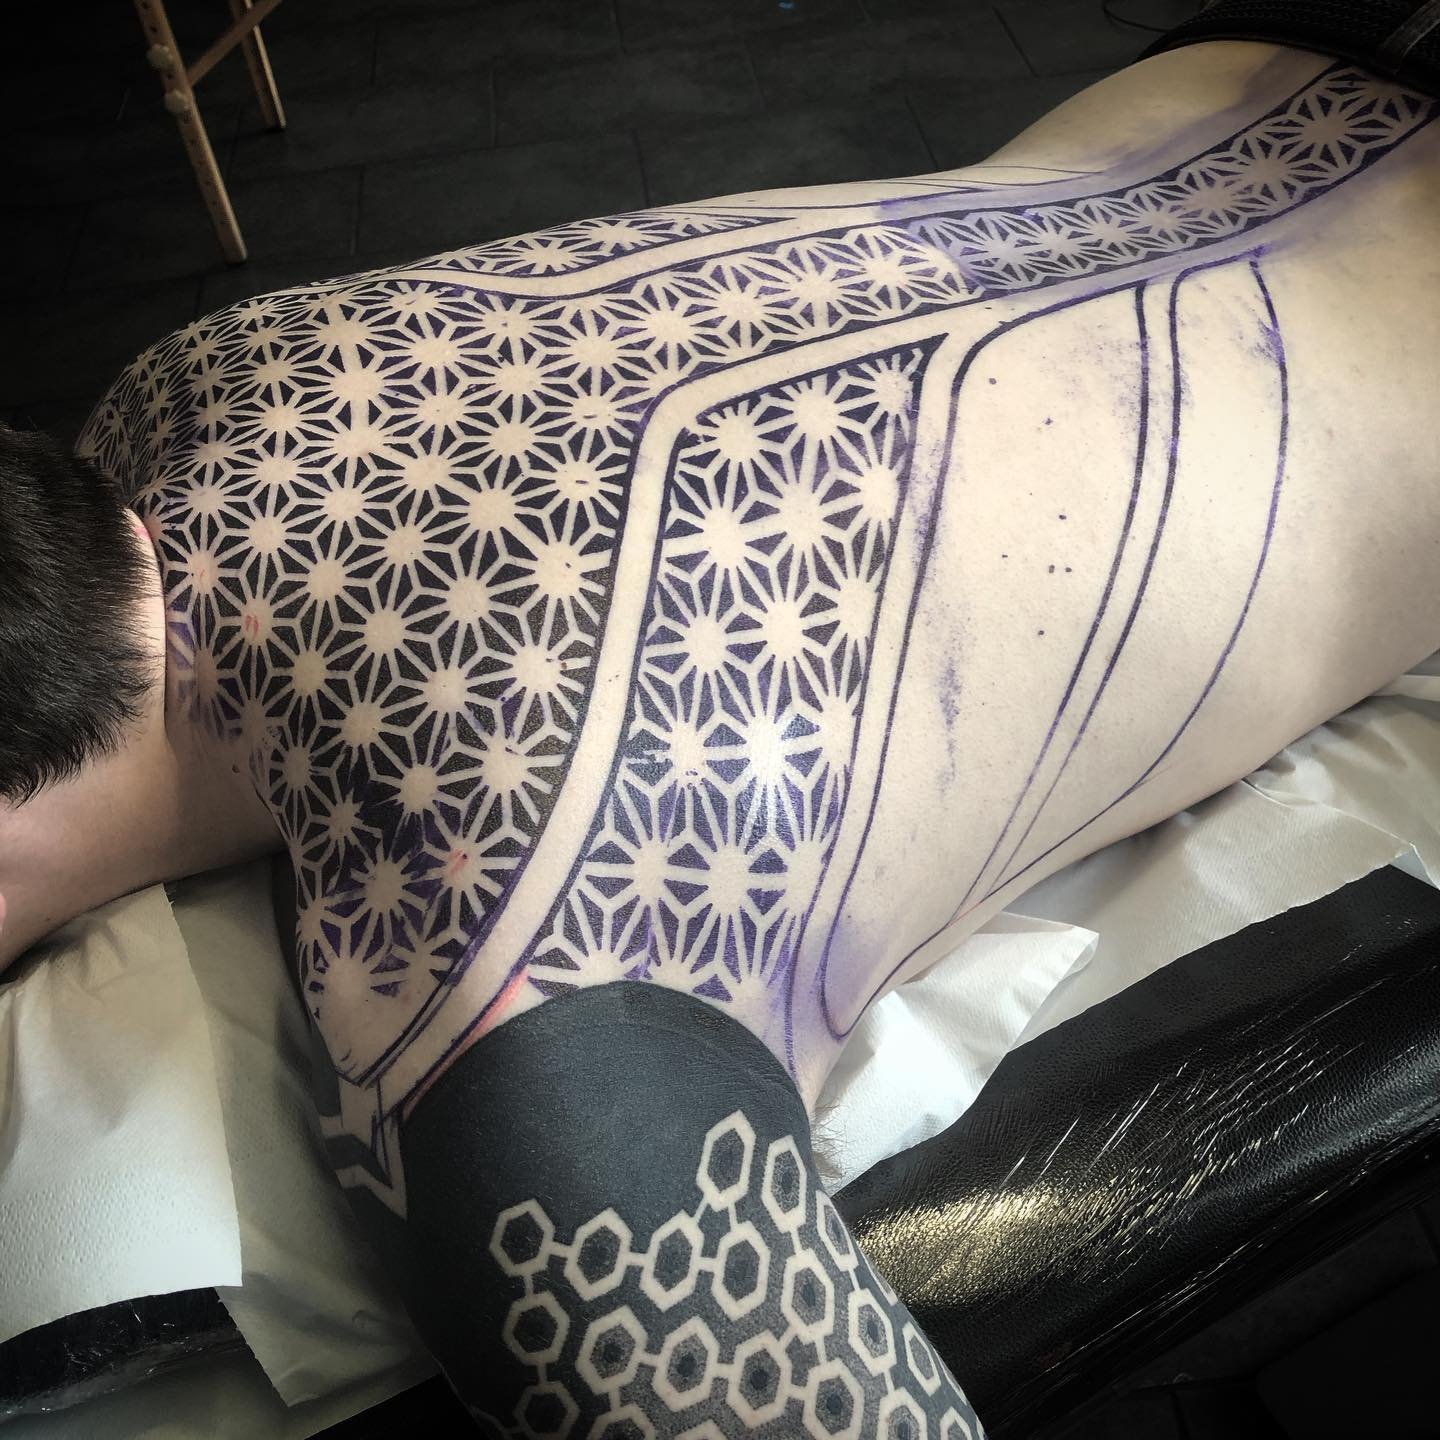 Off to a great start for Reece on his backpiece yesterday @riversidetattoolondon

For bookings/info please email ✉️arcane.seth@gmail.com
&bull;
&bull;
#geometrictattoo #geometricdesign #dotworktattoo #dotworkers #dotwork #dotworkmandala #australianta